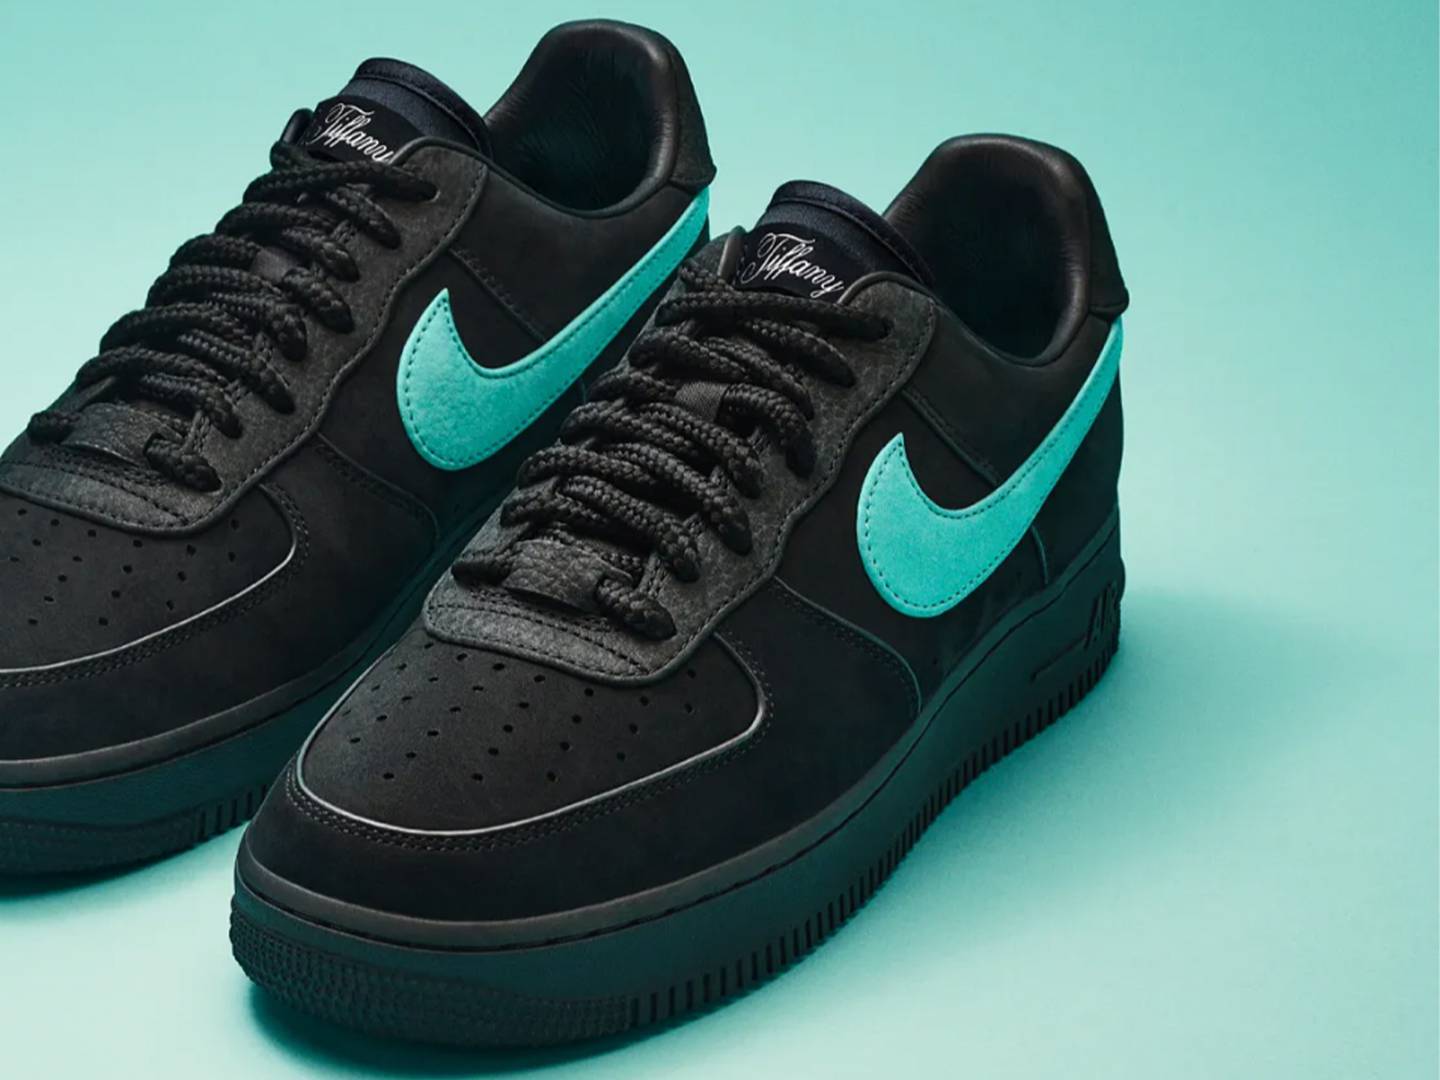 Nike Collabs With Louis Vuitton on Luxury Air Force 1 Sneakers